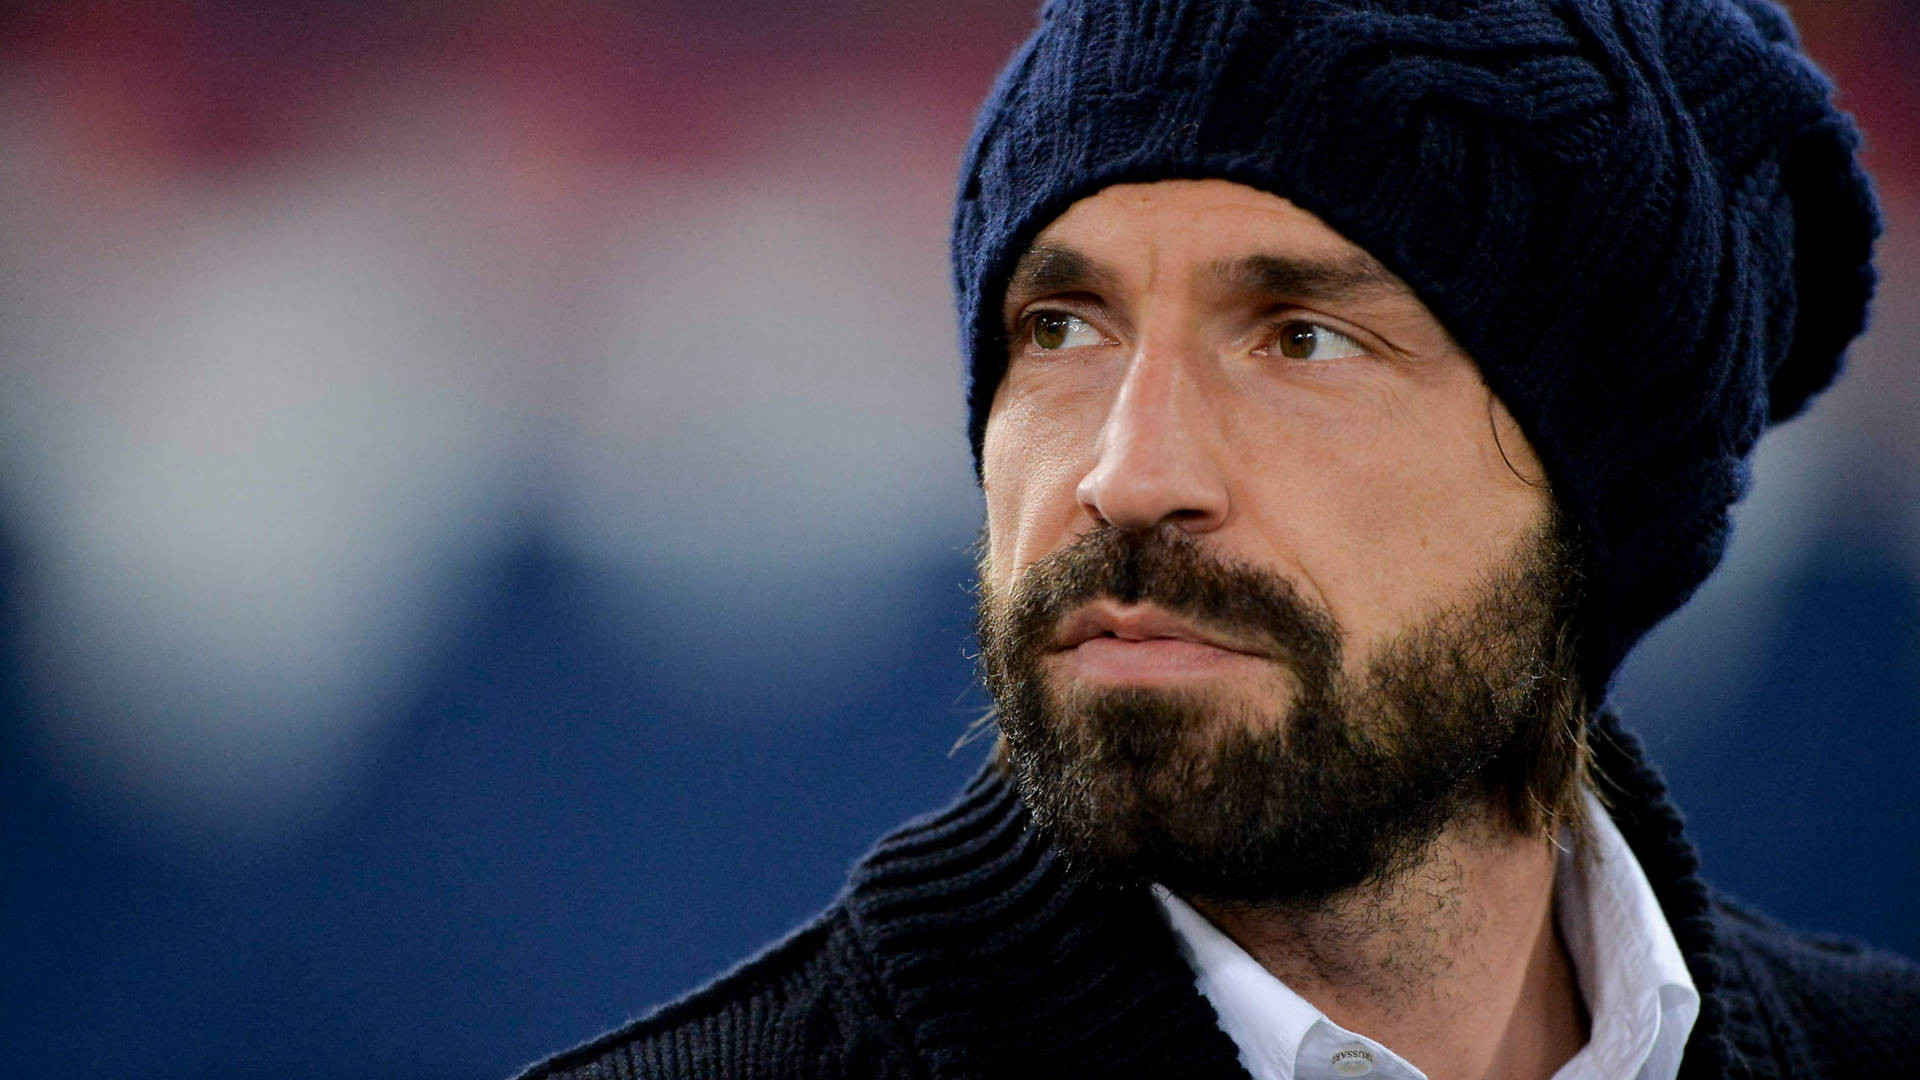 Andrea Pirlo In A Stylish Beanie Hat